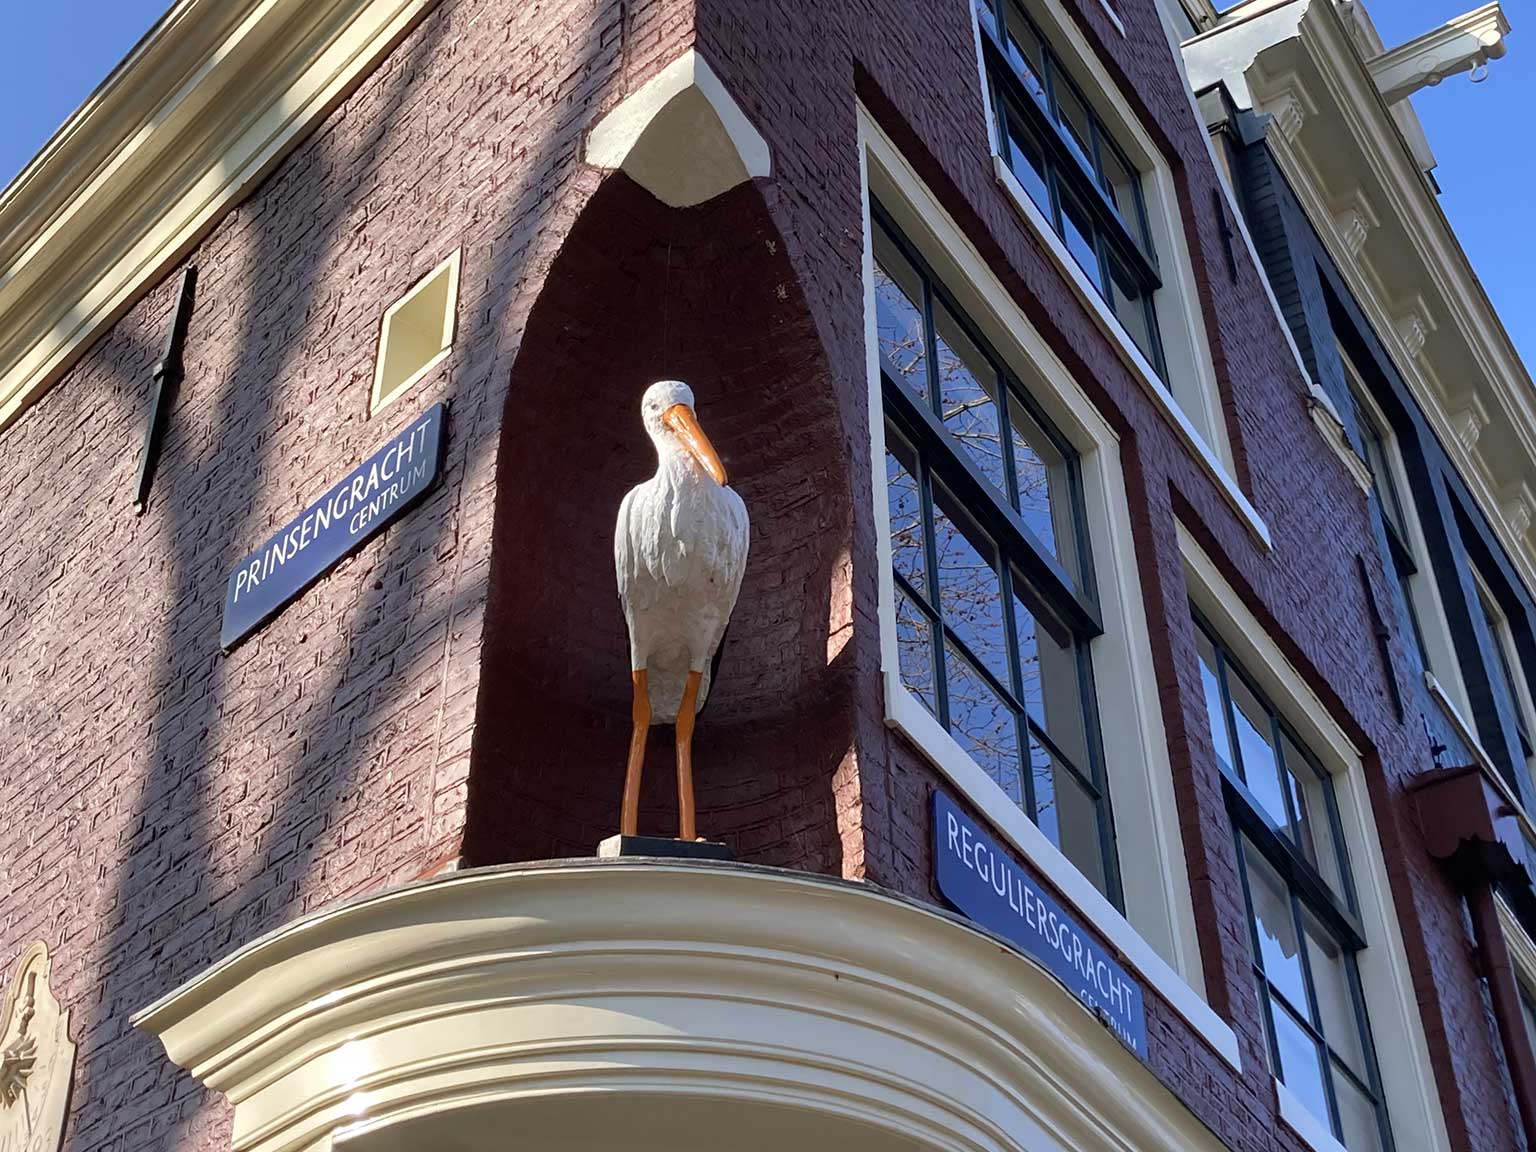 Close-up of the stork, corner Prinsengracht and Reguliersgracht, Amsterdam